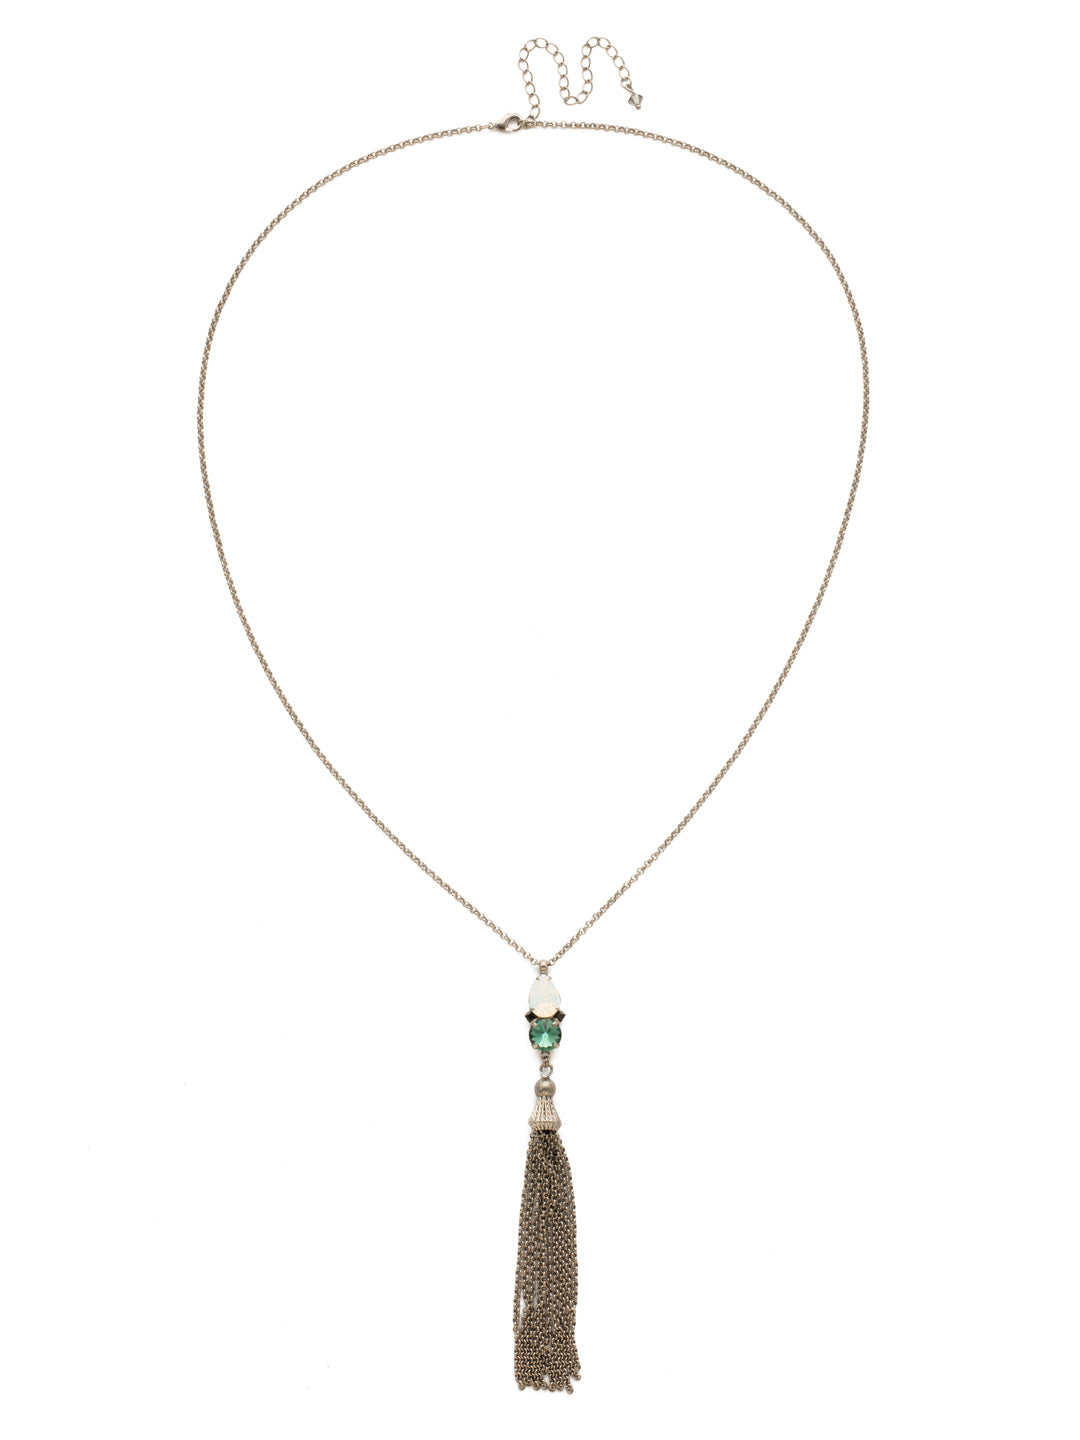 Timeless Tassel Necklace - NDN51ASGDG - <p>Our Tassel Necklace has pear and round shaped crystals embellish an ornamental tassel. Wear alone or with your favorite pendants and classic styles. From Sorrelli's Game Day Green collection in our Antique Silver-tone finish.</p>